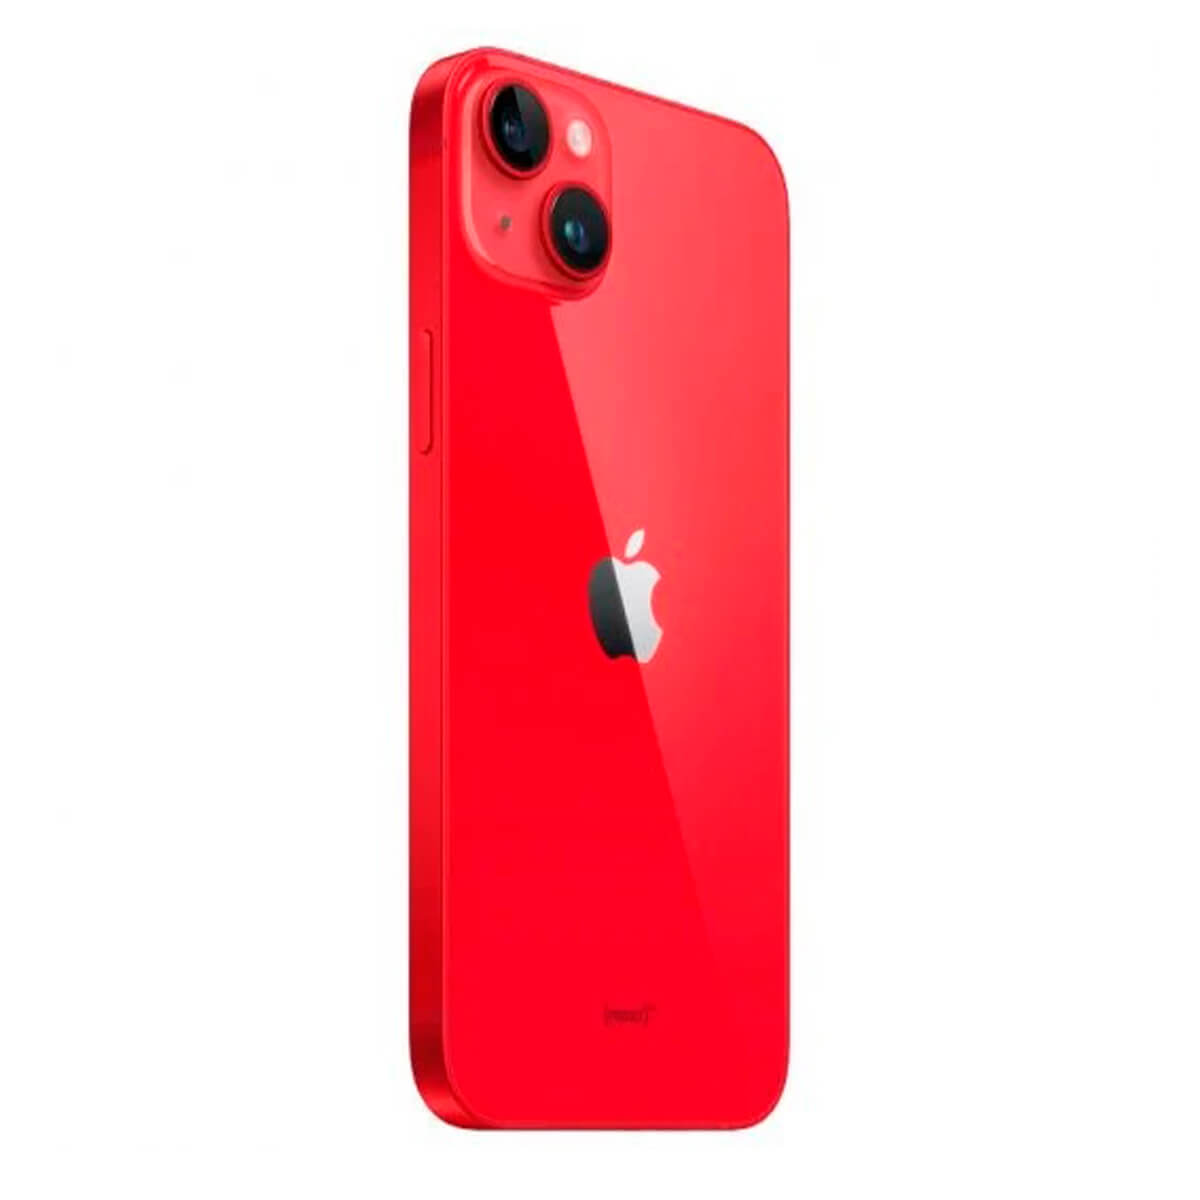 Apple iPhone 14 Plus 256GB Rojo (PRODUCT RED)